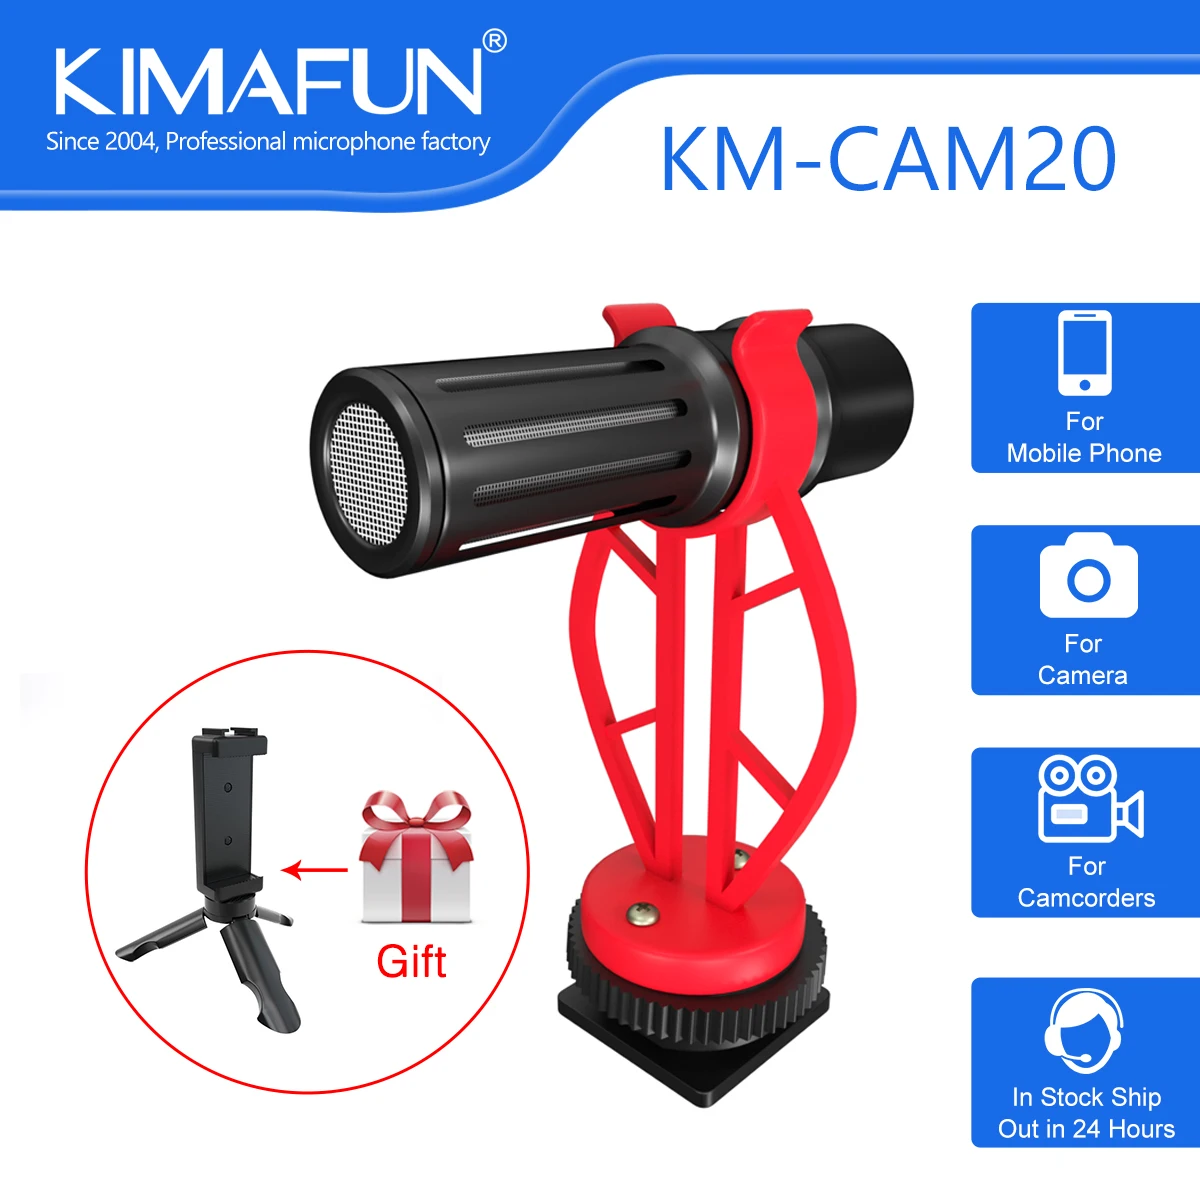 

KIMAFUN Mini Microphone External Video Mic for DSLR Cameras Camcorders iPhone Andorid Tablet Canon/Nikon/Sony Vlogging Interview